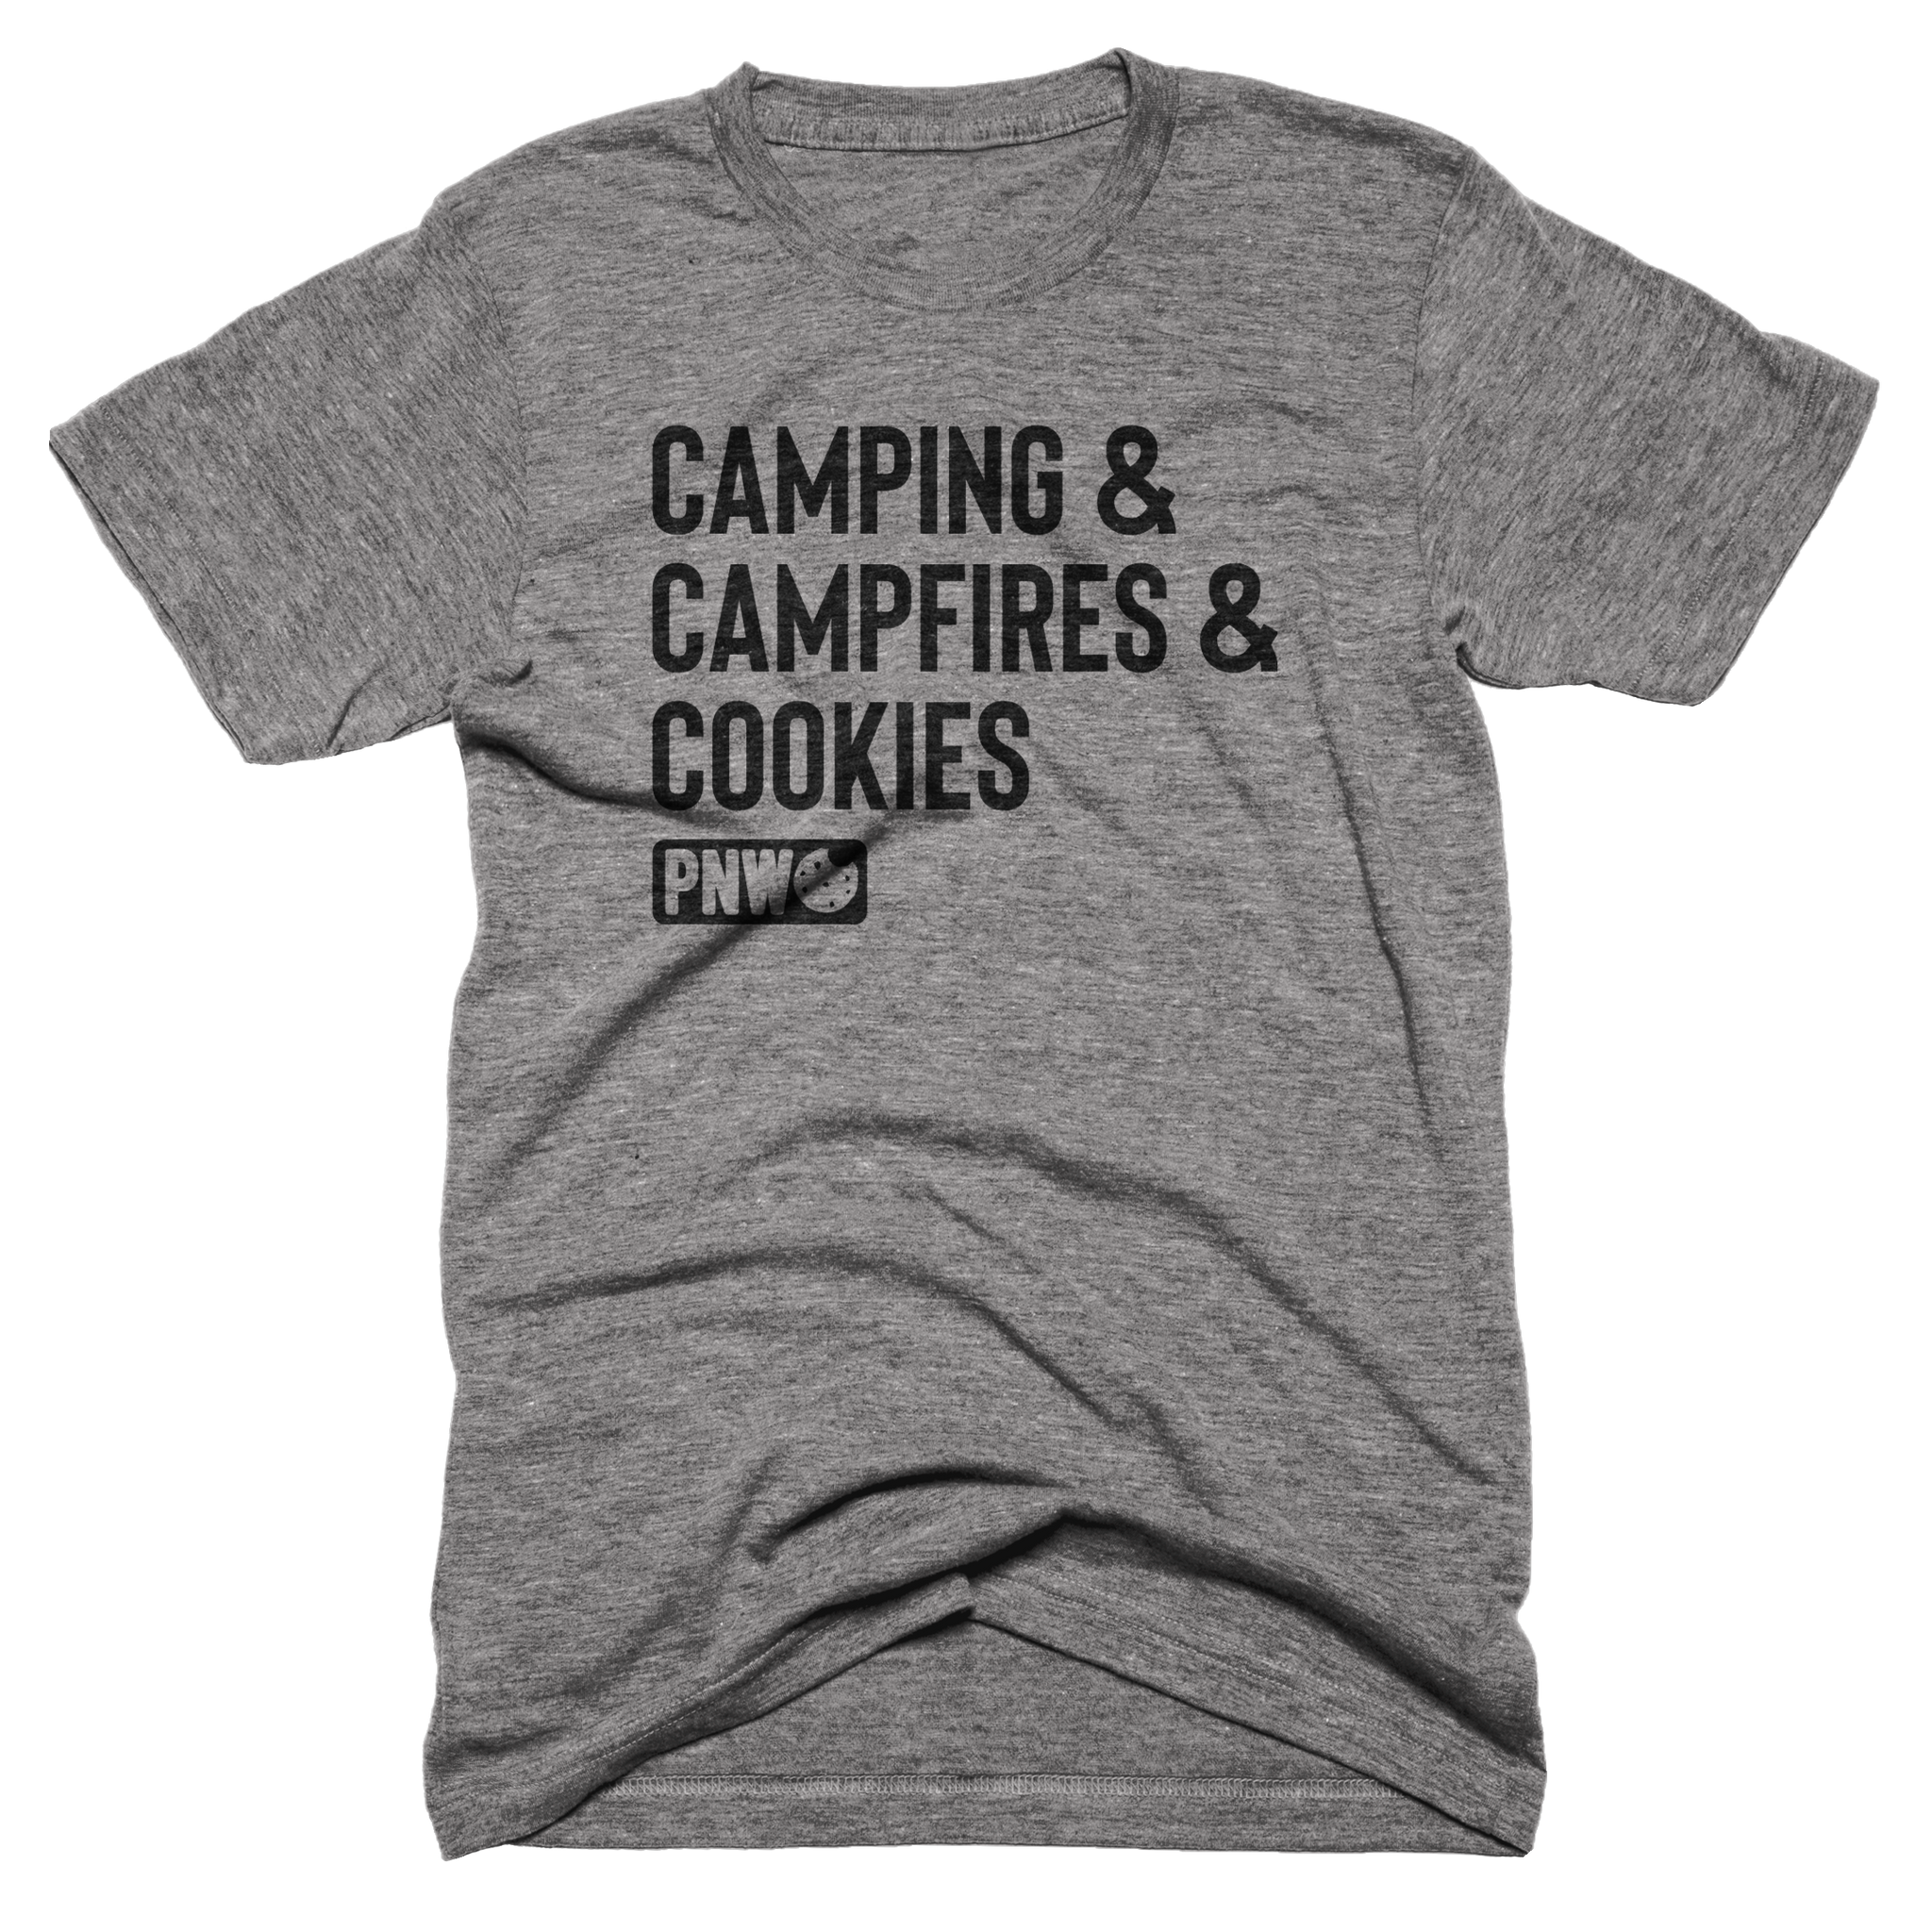 Camping, Campfires & Cookies Tee - Pacific Northwest Cookie Company